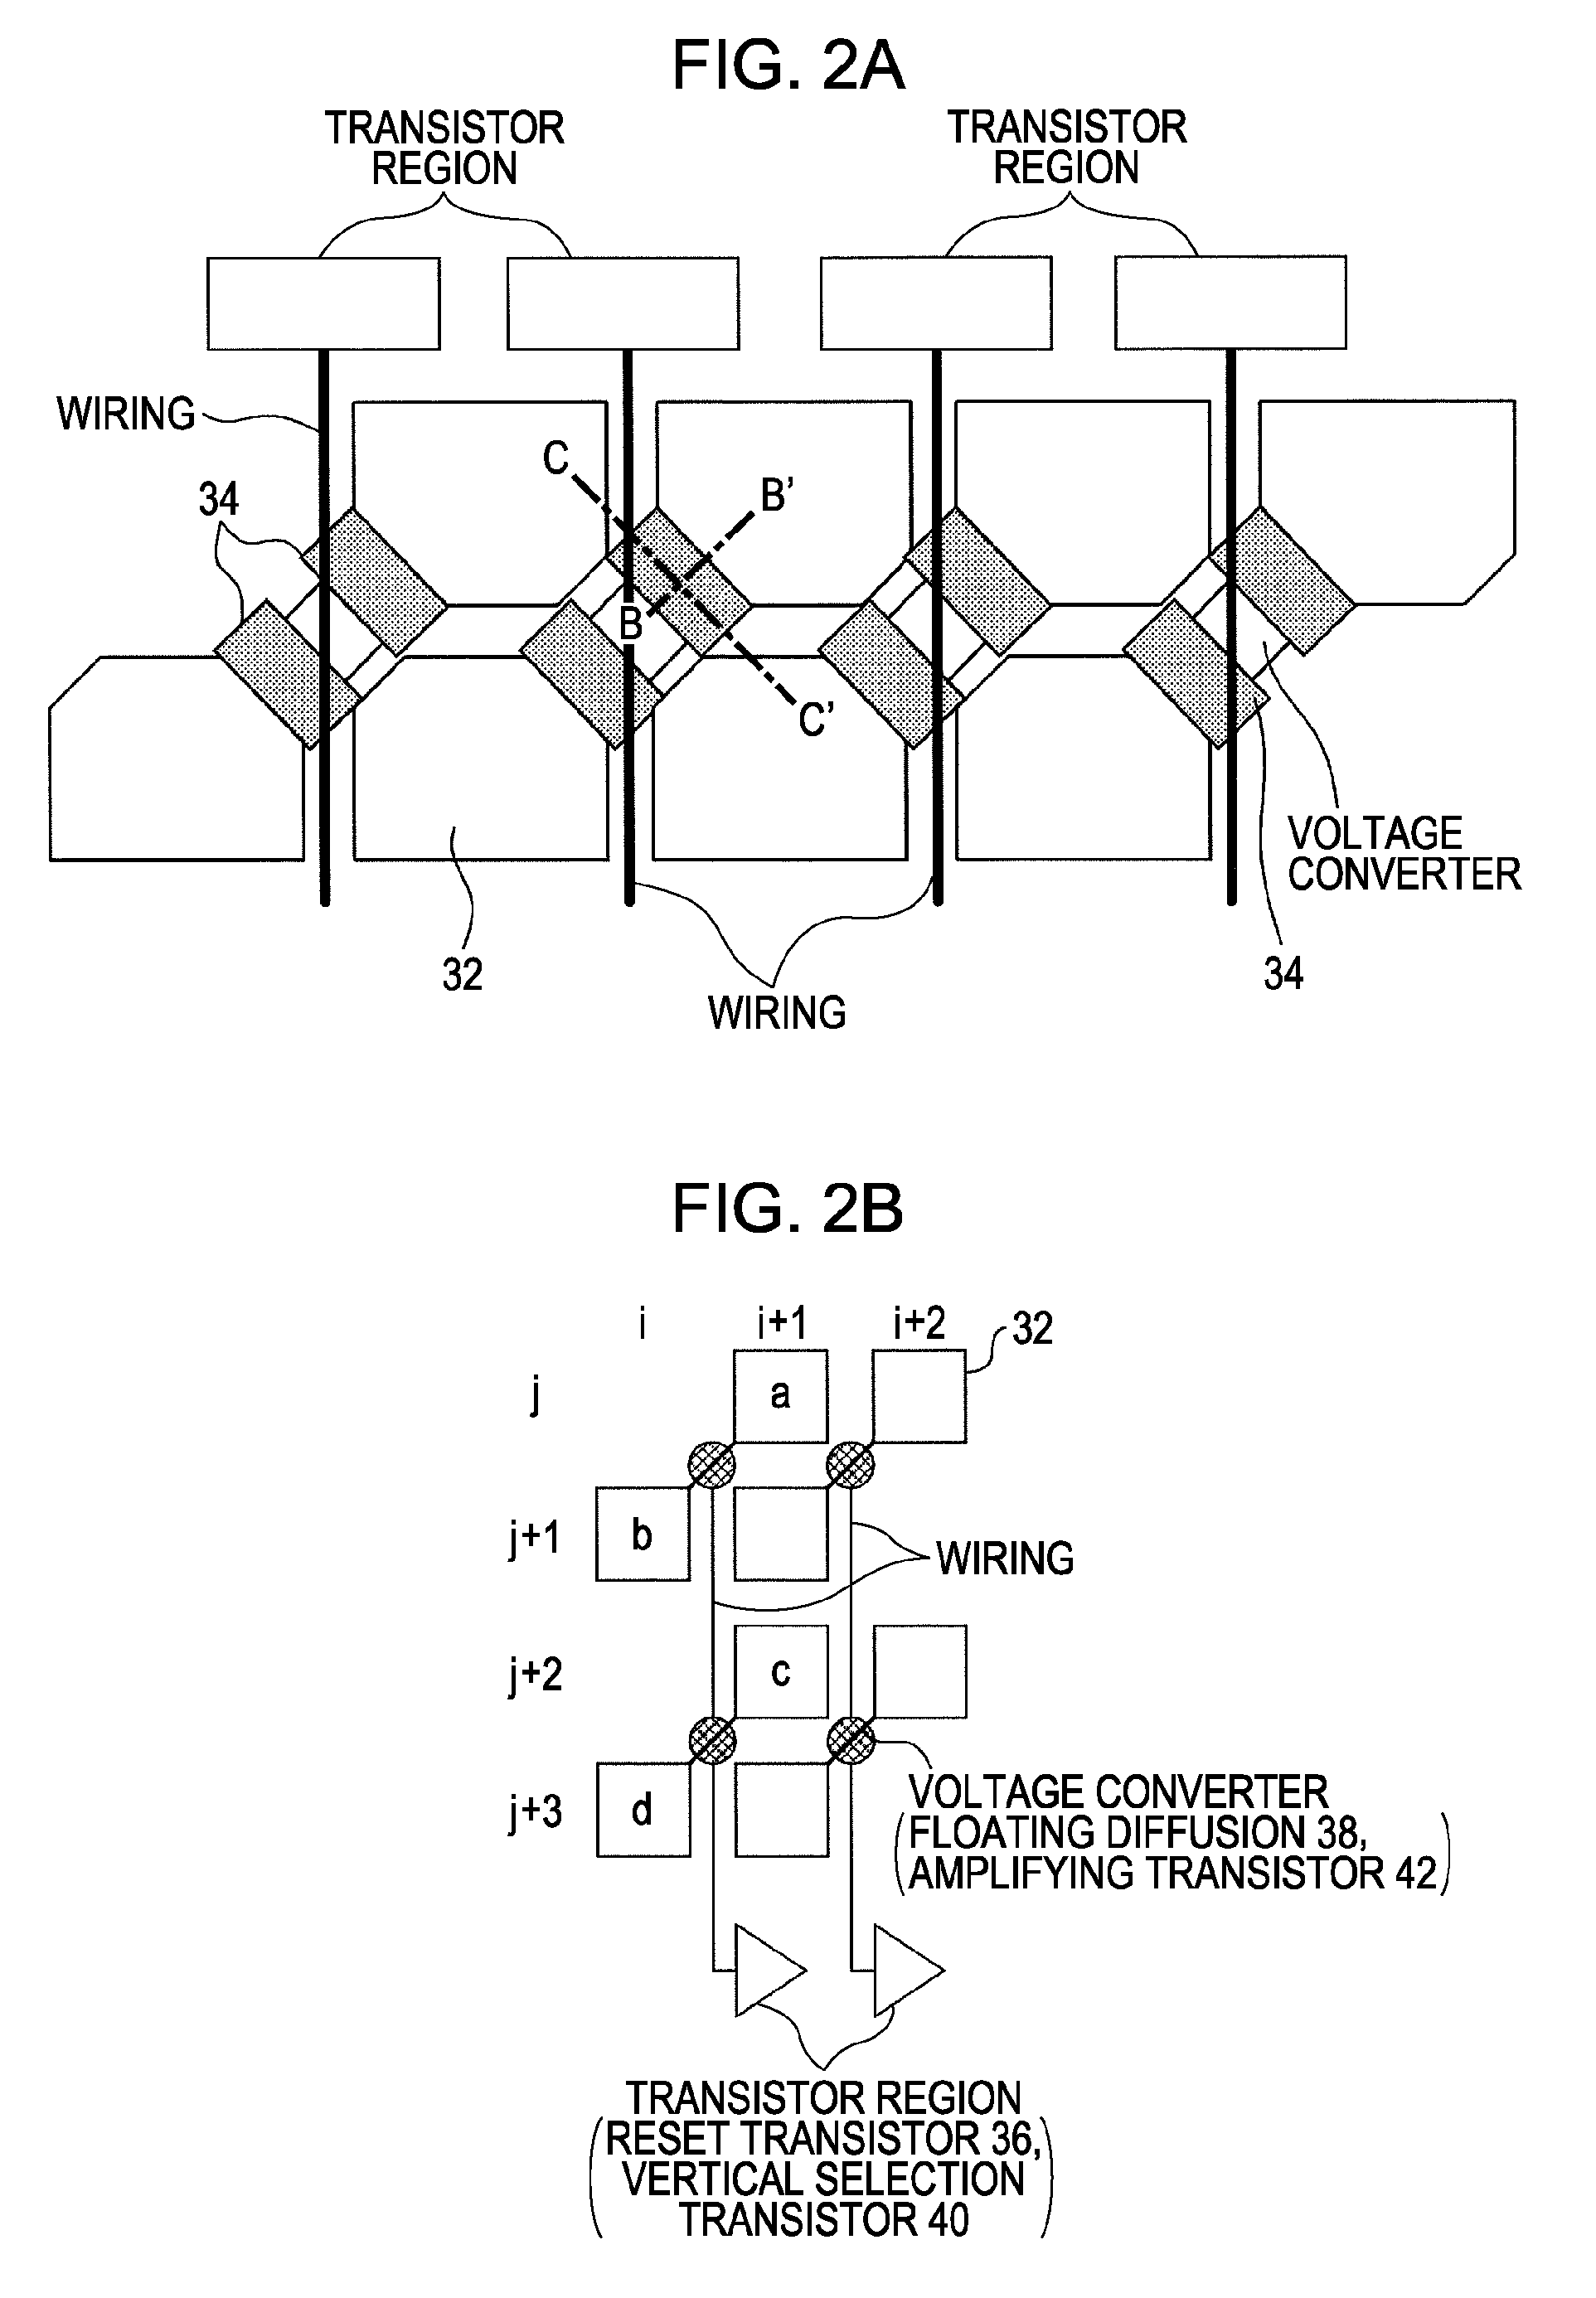 Solid-state imaging device and imaging device